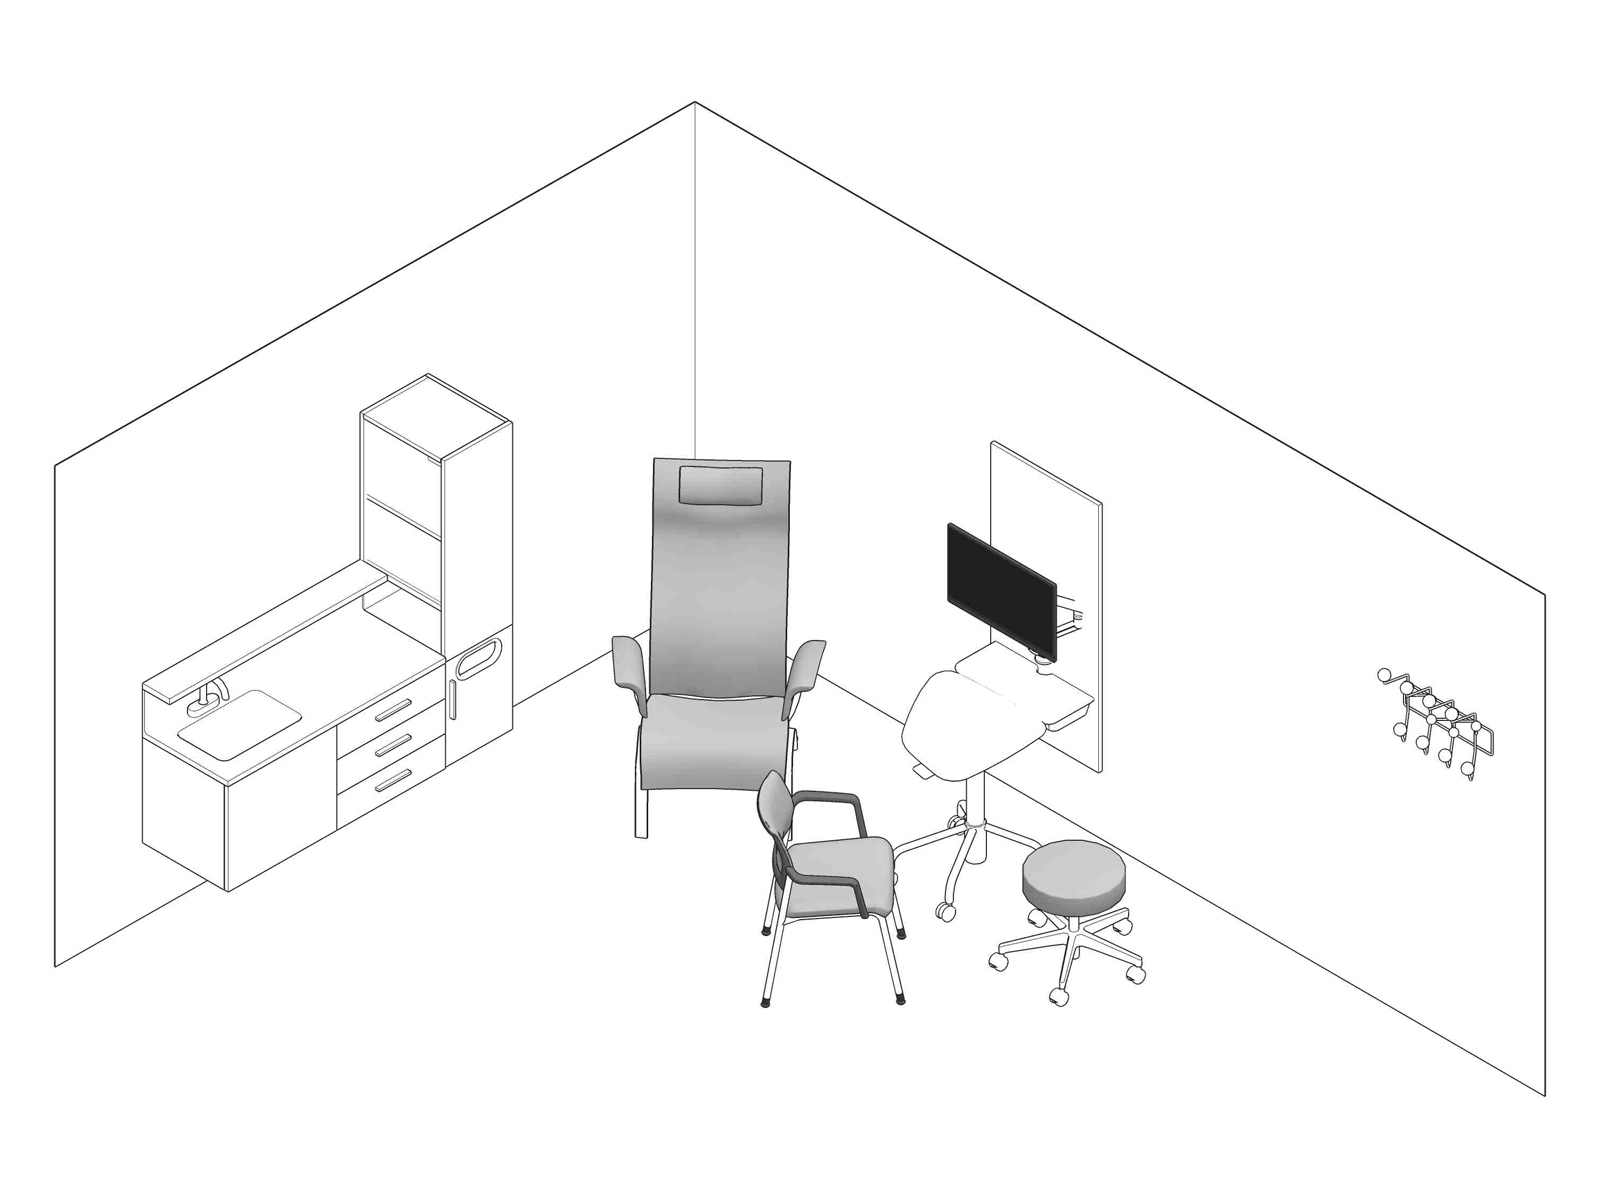 A line drawing - Exam Room 004